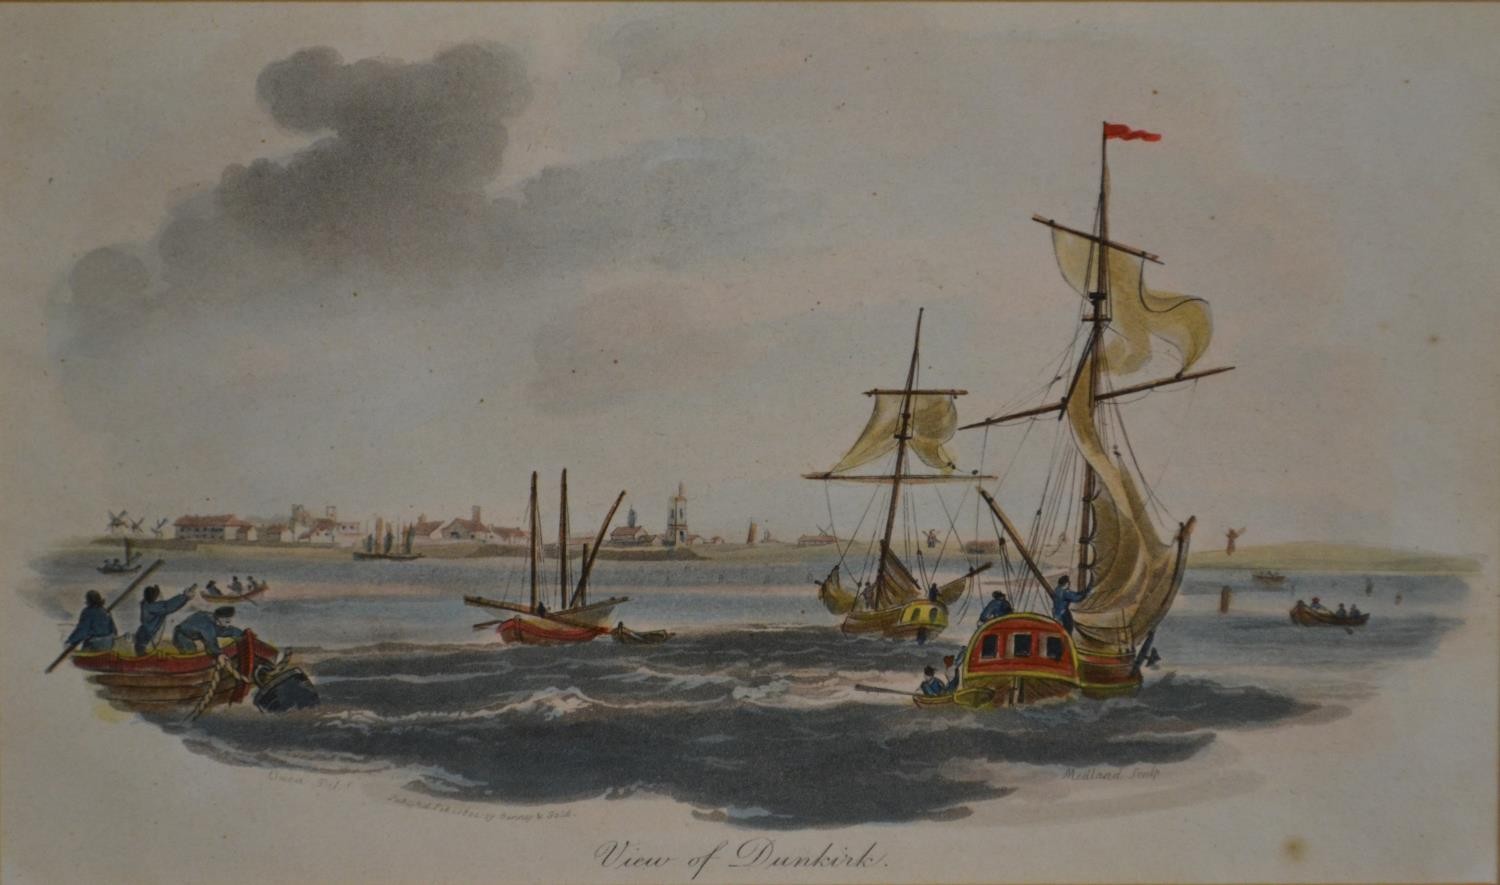 Three framed and glazed hand coloured 19th century engravings including "View of Dunkirk" and "The - Image 2 of 5